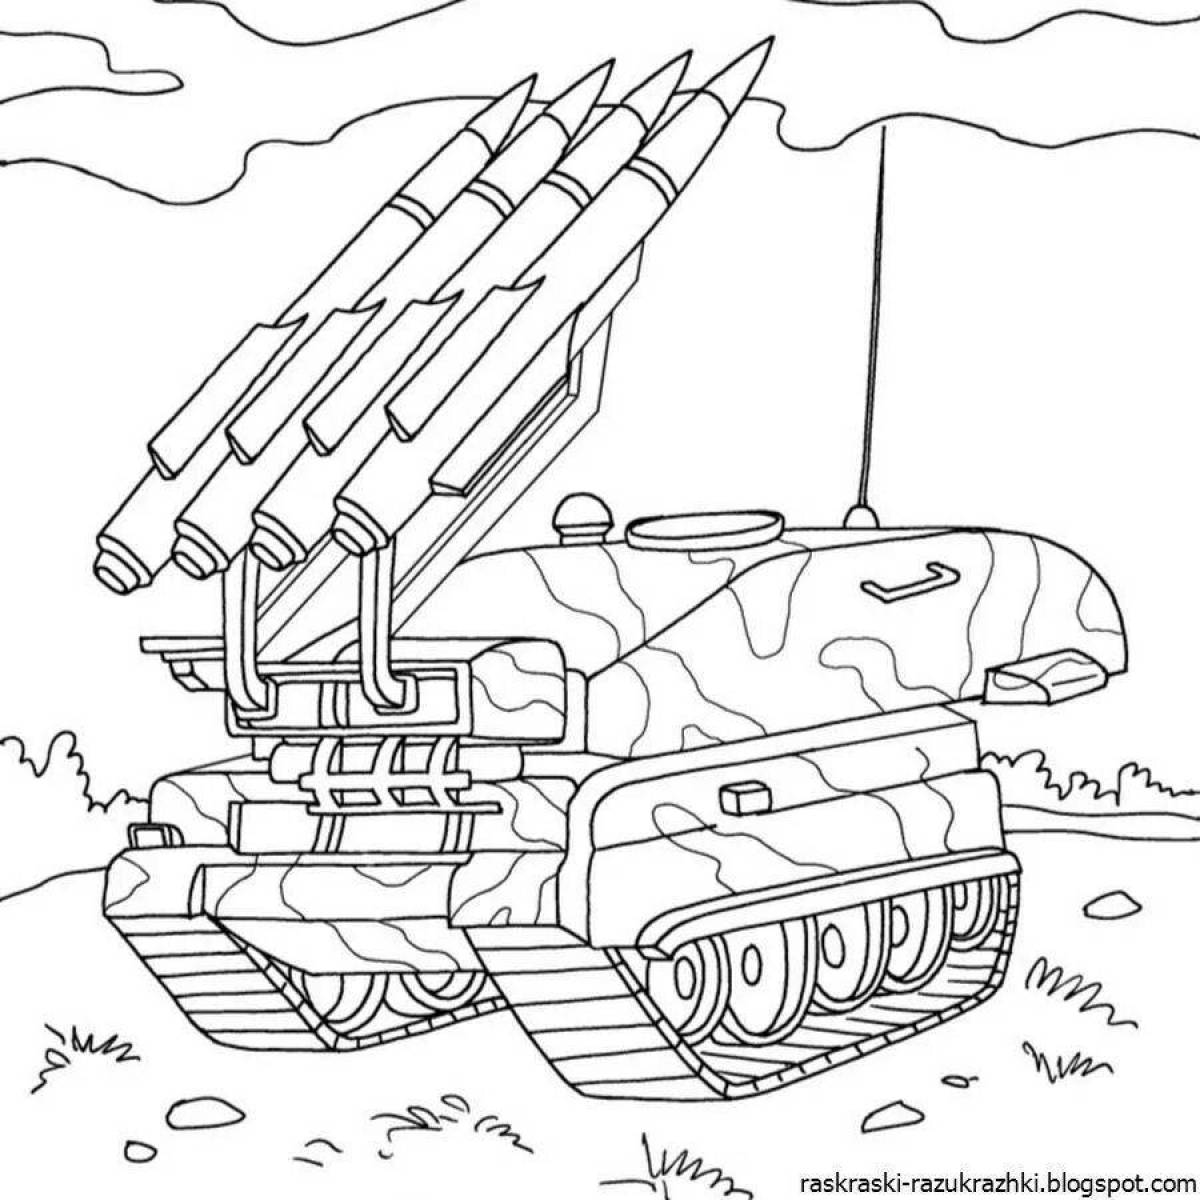 Adorable Russian army coloring book for kids